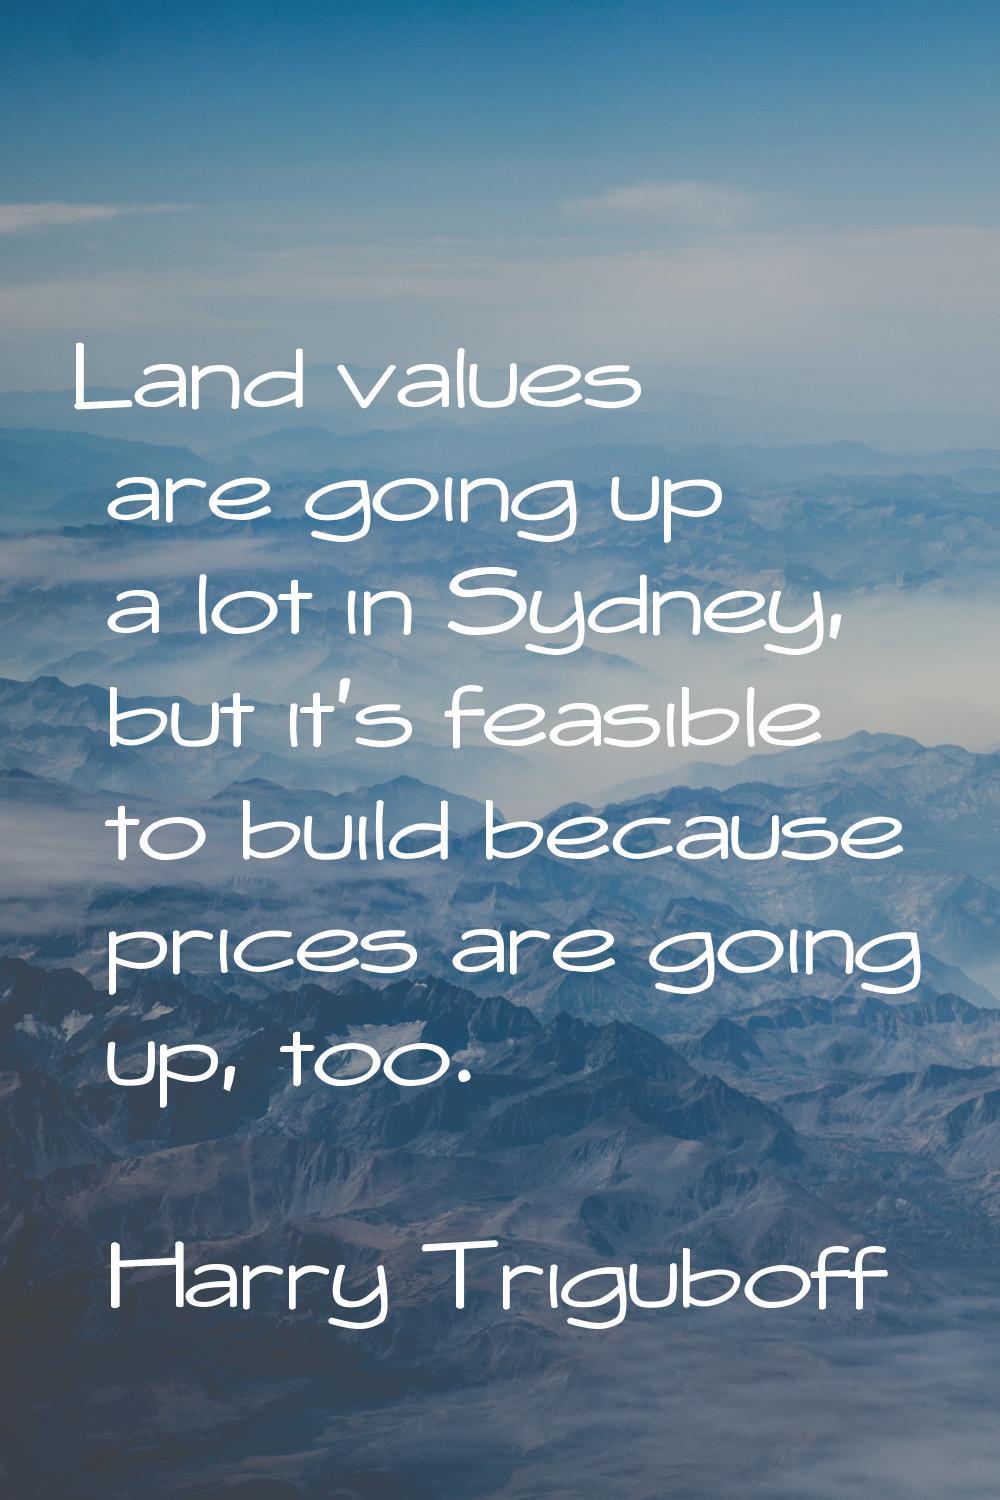 Land values are going up a lot in Sydney, but it's feasible to build because prices are going up, t